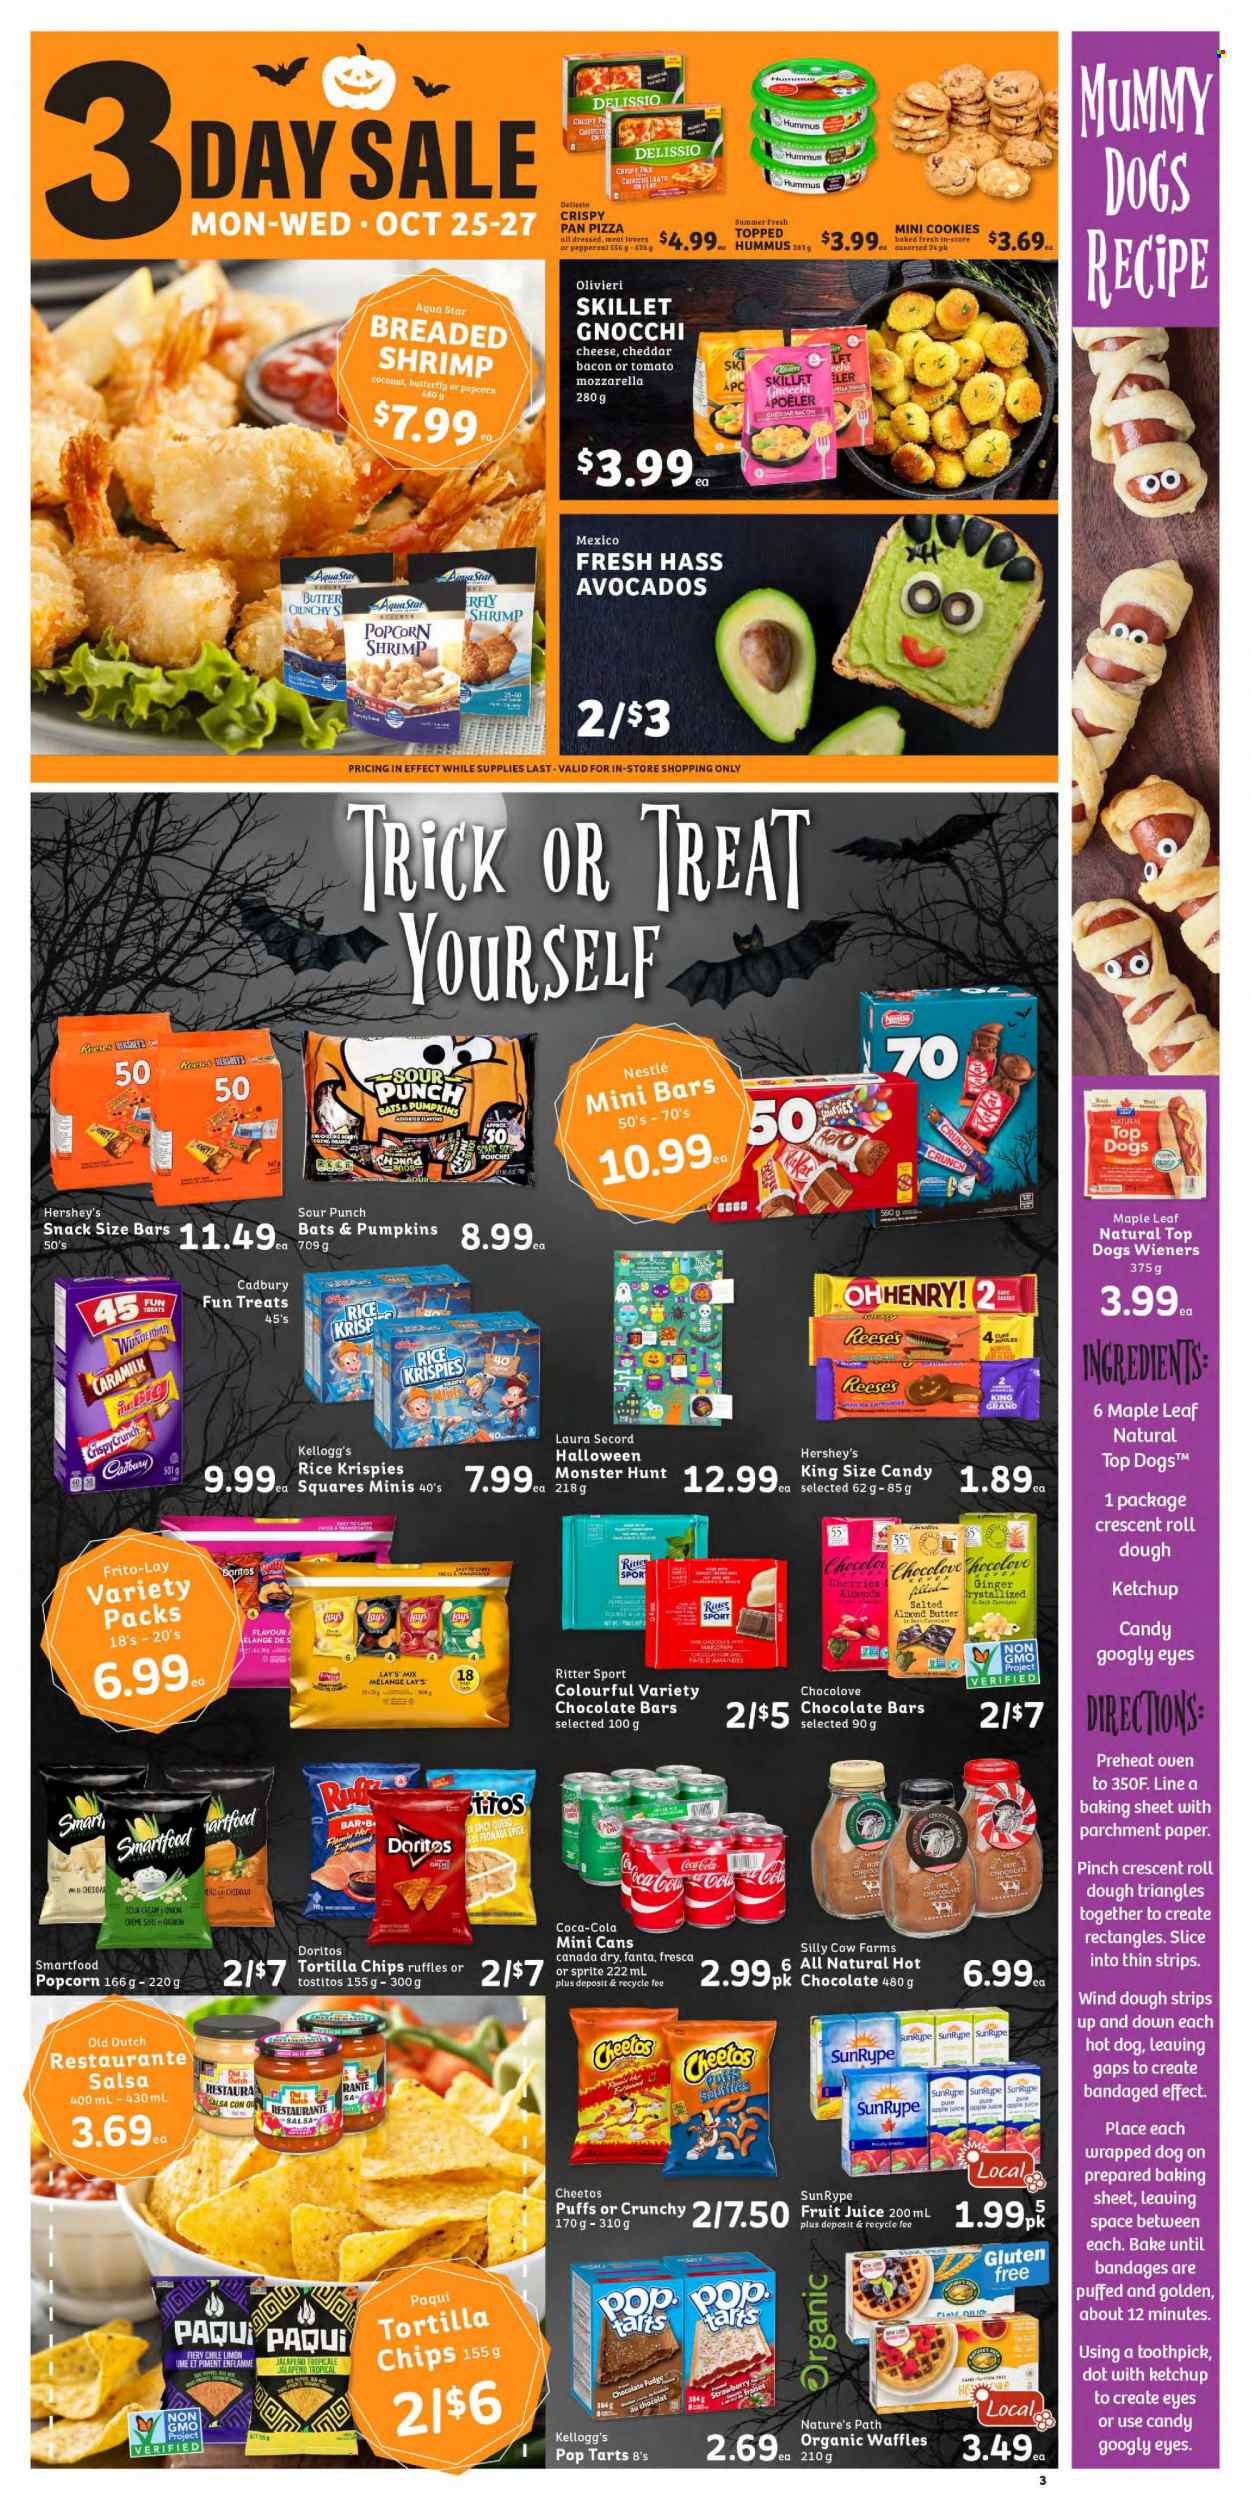 thumbnail - IGA Simple Goodness Flyer - October 22, 2021 - October 28, 2021 - Sales products - puffs, waffles, ginger, onion, jalapeño, avocado, coconut, shrimps, hot dog, pizza, bacon, pepperoni, hummus, almond butter, sour cream, Reese's, Hershey's, cookies, fudge, snack, Kellogg's, dark chocolate, Cadbury, Ritter Sport, Pop-Tarts, chocolate bar, Doritos, tortilla chips, Cheetos, Lay’s, Smartfood, Frito-Lay, Ruffles, Tostitos, marzipan, Rice Krispies, salsa, almonds, apple juice, Canada Dry, Coca-Cola, Sprite, juice, fruit juice, Fanta, Monster, hot chocolate, Nestlé, gnocchi, ketchup, chips, oranges. Page 3.